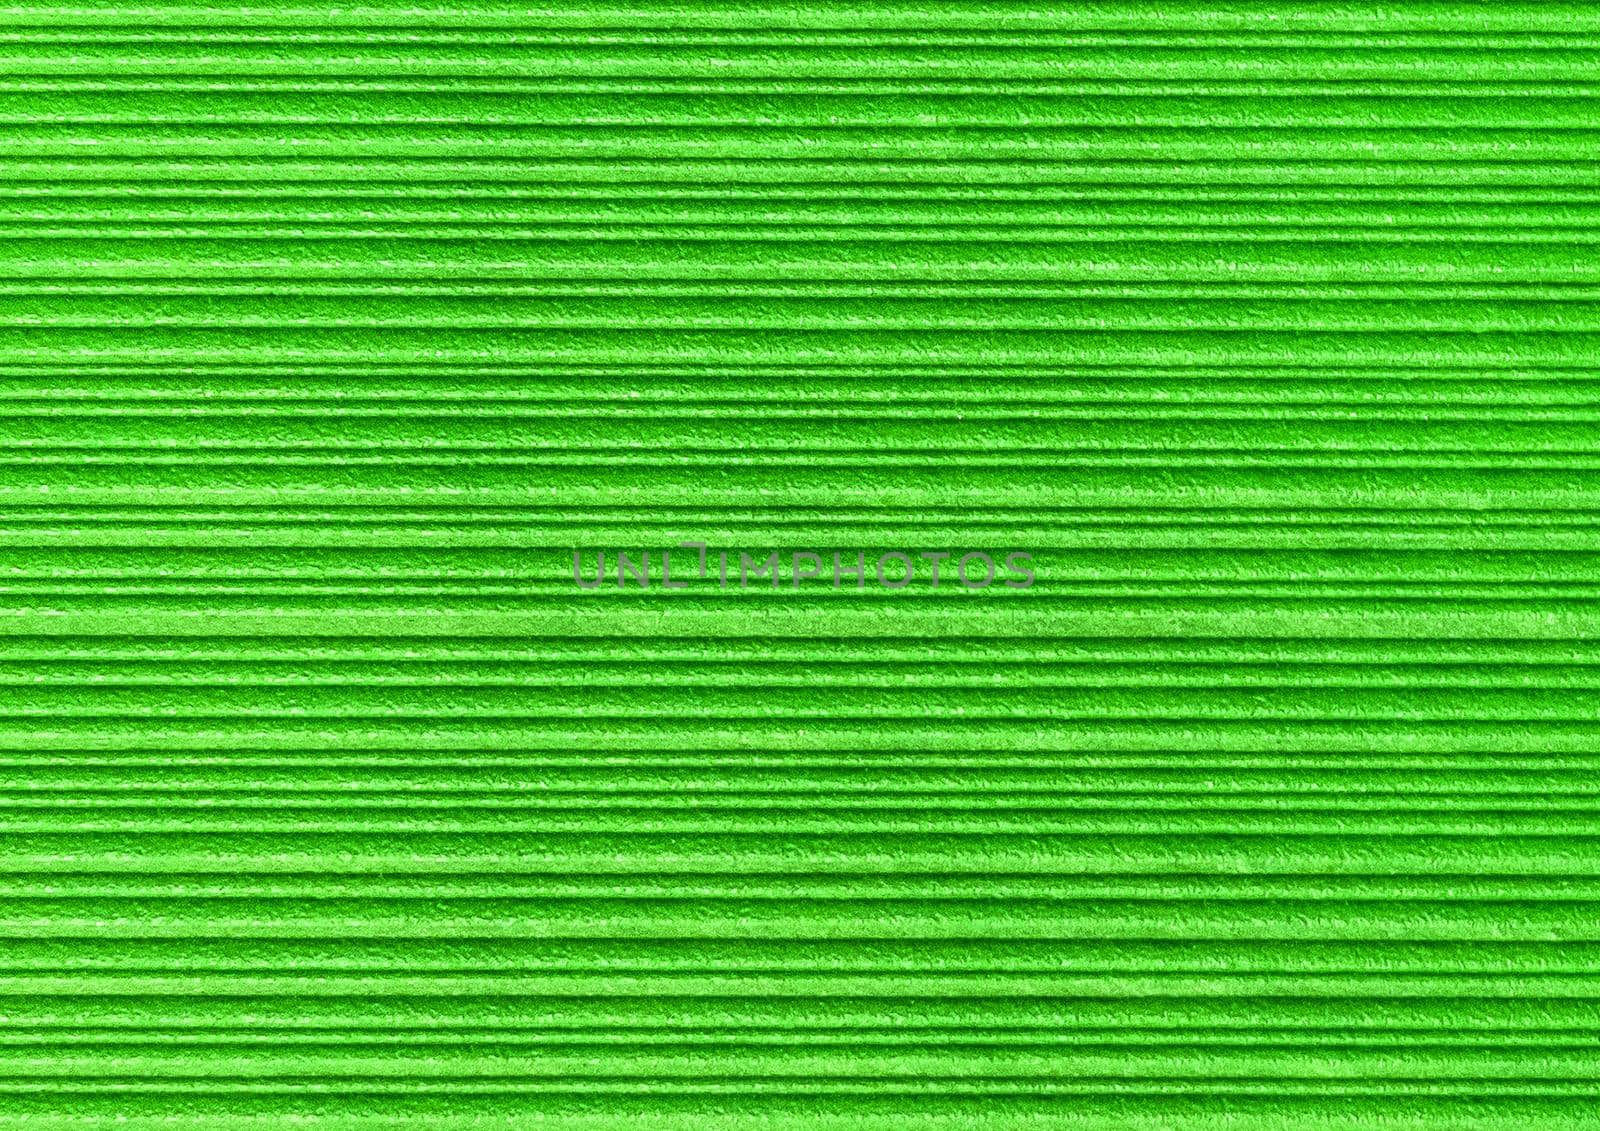 Green abstract striped pattern wallpaper background, paper texture with horizontal lines by AYDO8